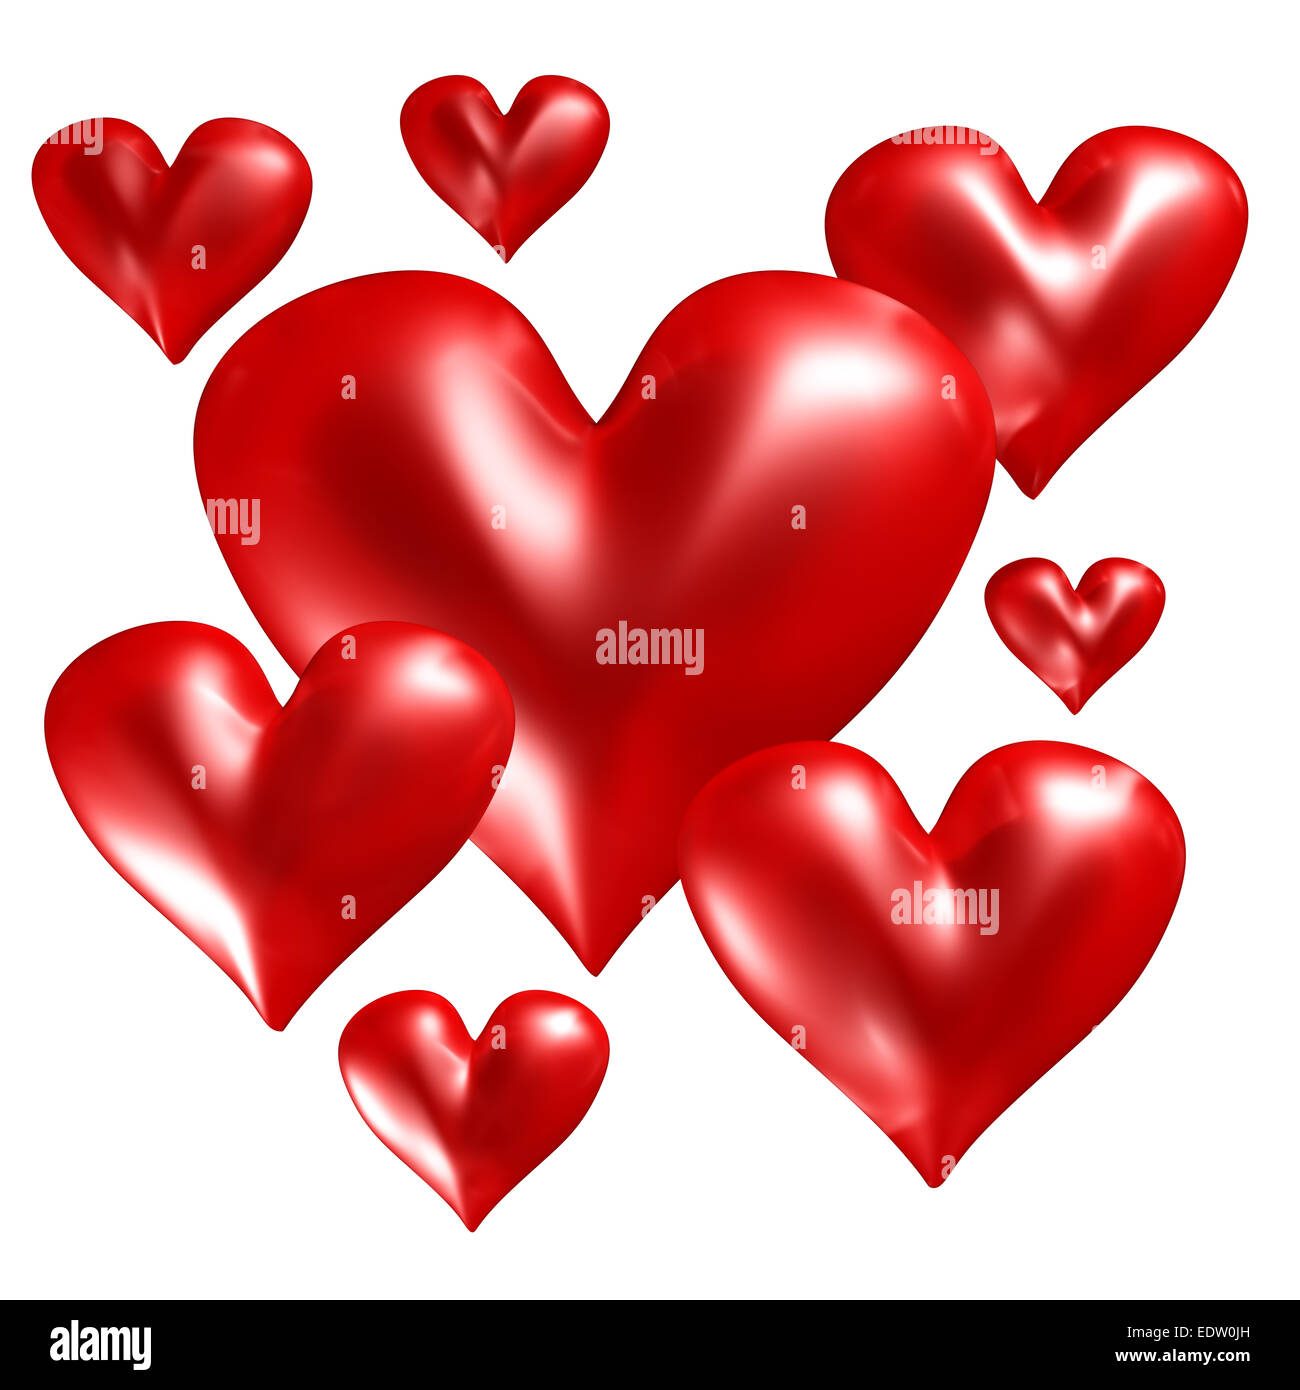 Group of red hearts Stock Photo